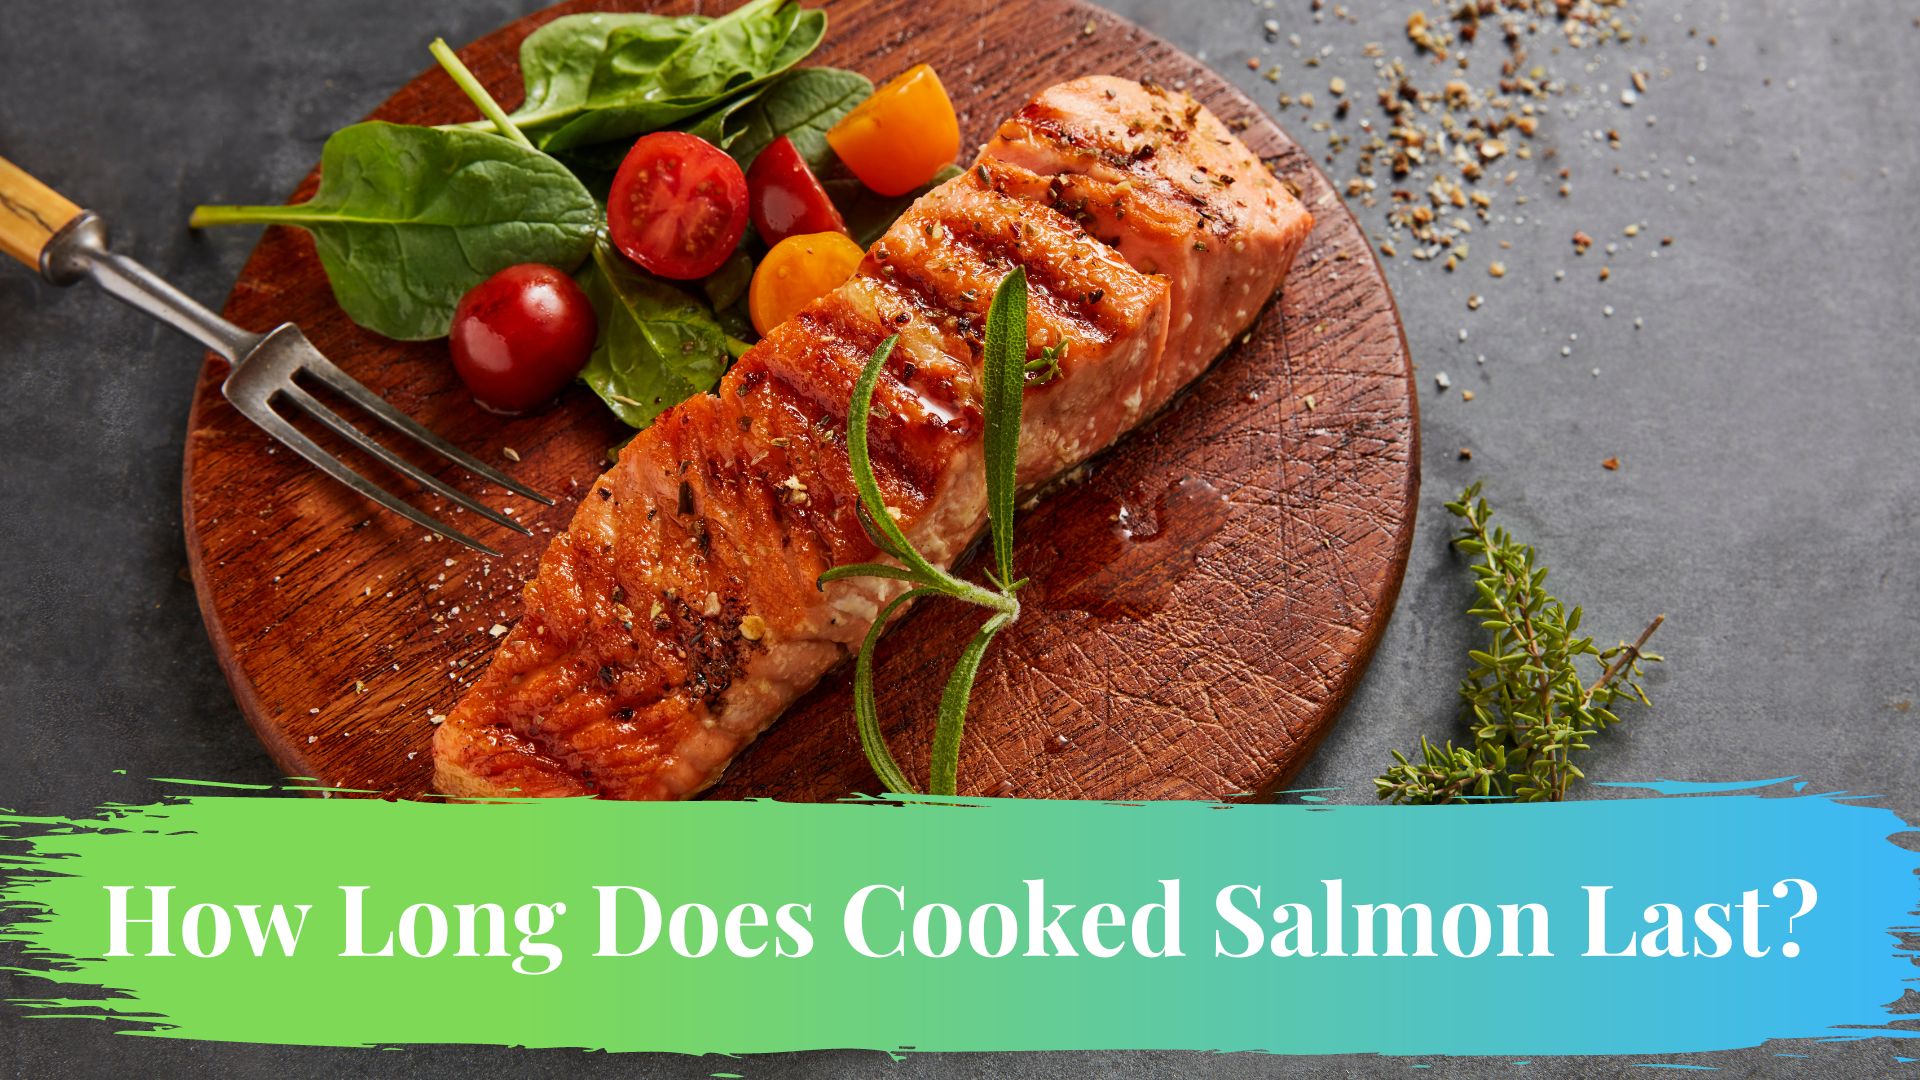 How Long Does Cooked Salmon Last?